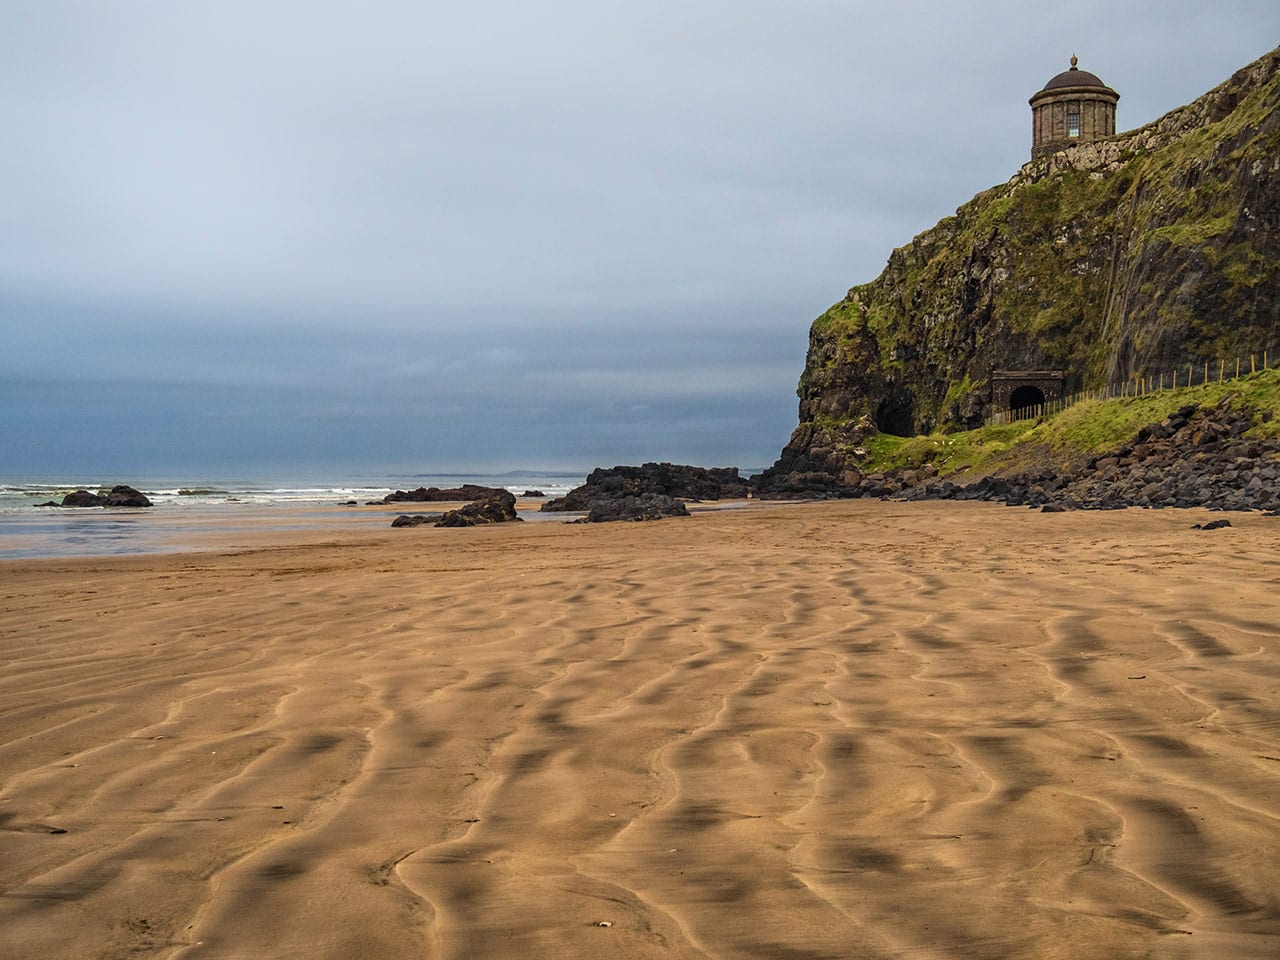 Game of Thrones Filming Locations: Downhill Strand, Northern Ireland